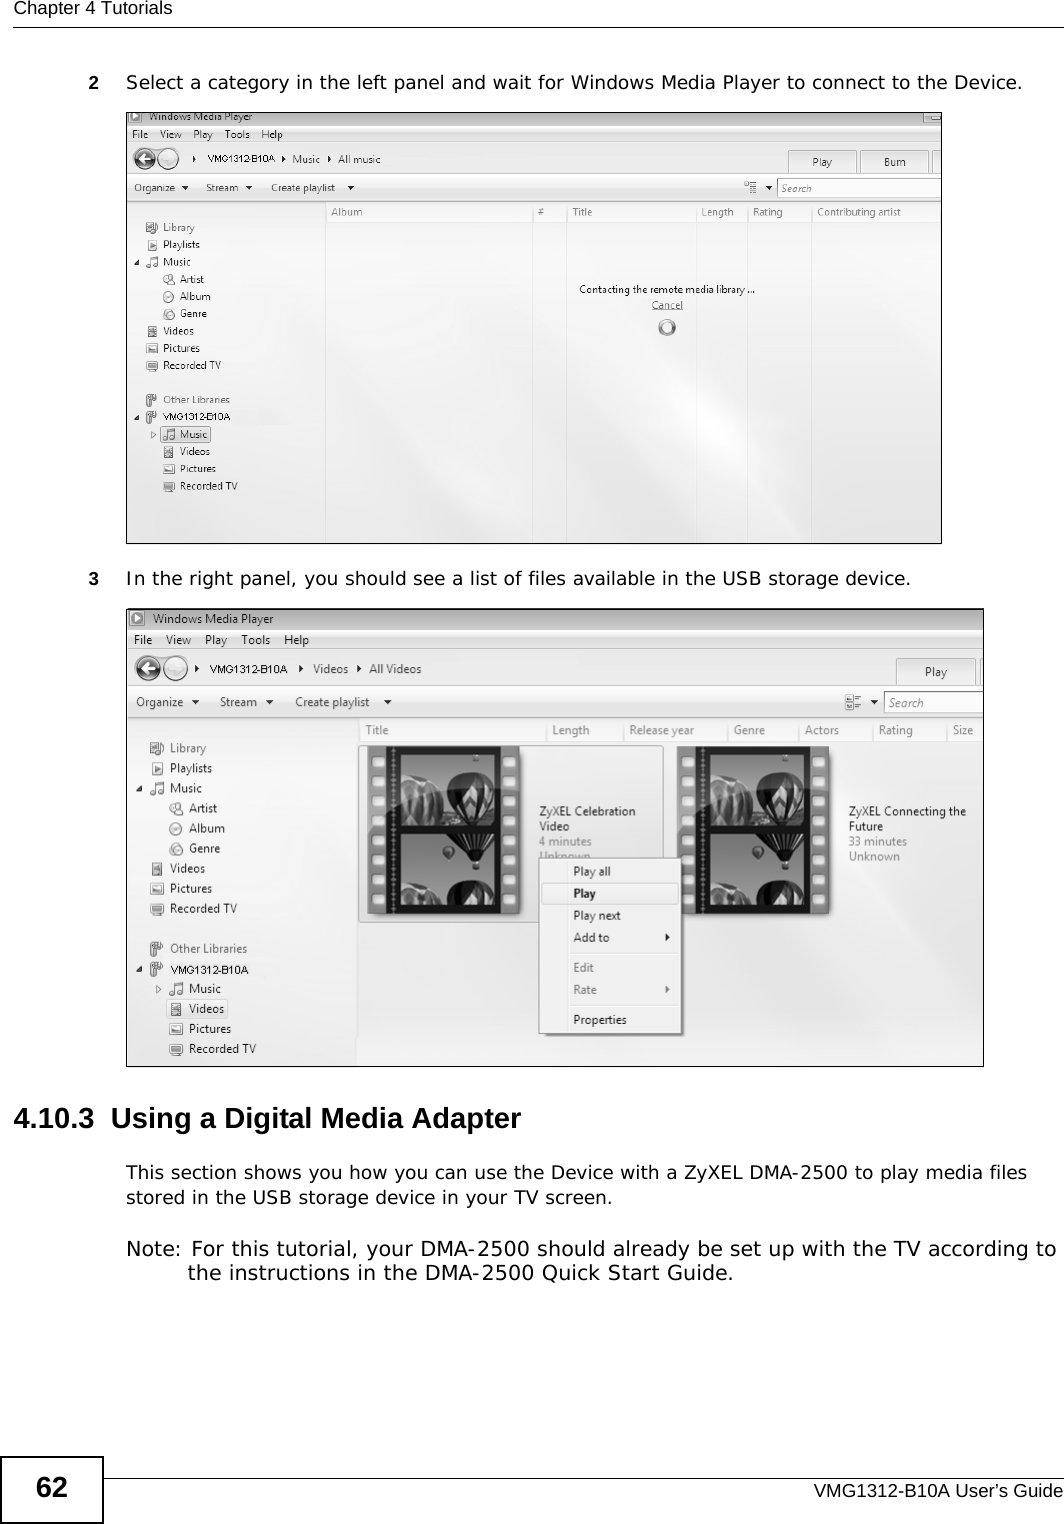 Chapter 4 TutorialsVMG1312-B10A User’s Guide622Select a category in the left panel and wait for Windows Media Player to connect to the Device.Tutorial: Media Sharing using Windows 7 (2)3In the right panel, you should see a list of files available in the USB storage device. Tutorial: Media Sharing using Windows 7 (2)4.10.3  Using a Digital Media AdapterThis section shows you how you can use the Device with a ZyXEL DMA-2500 to play media files stored in the USB storage device in your TV screen. Note: For this tutorial, your DMA-2500 should already be set up with the TV according to the instructions in the DMA-2500 Quick Start Guide.